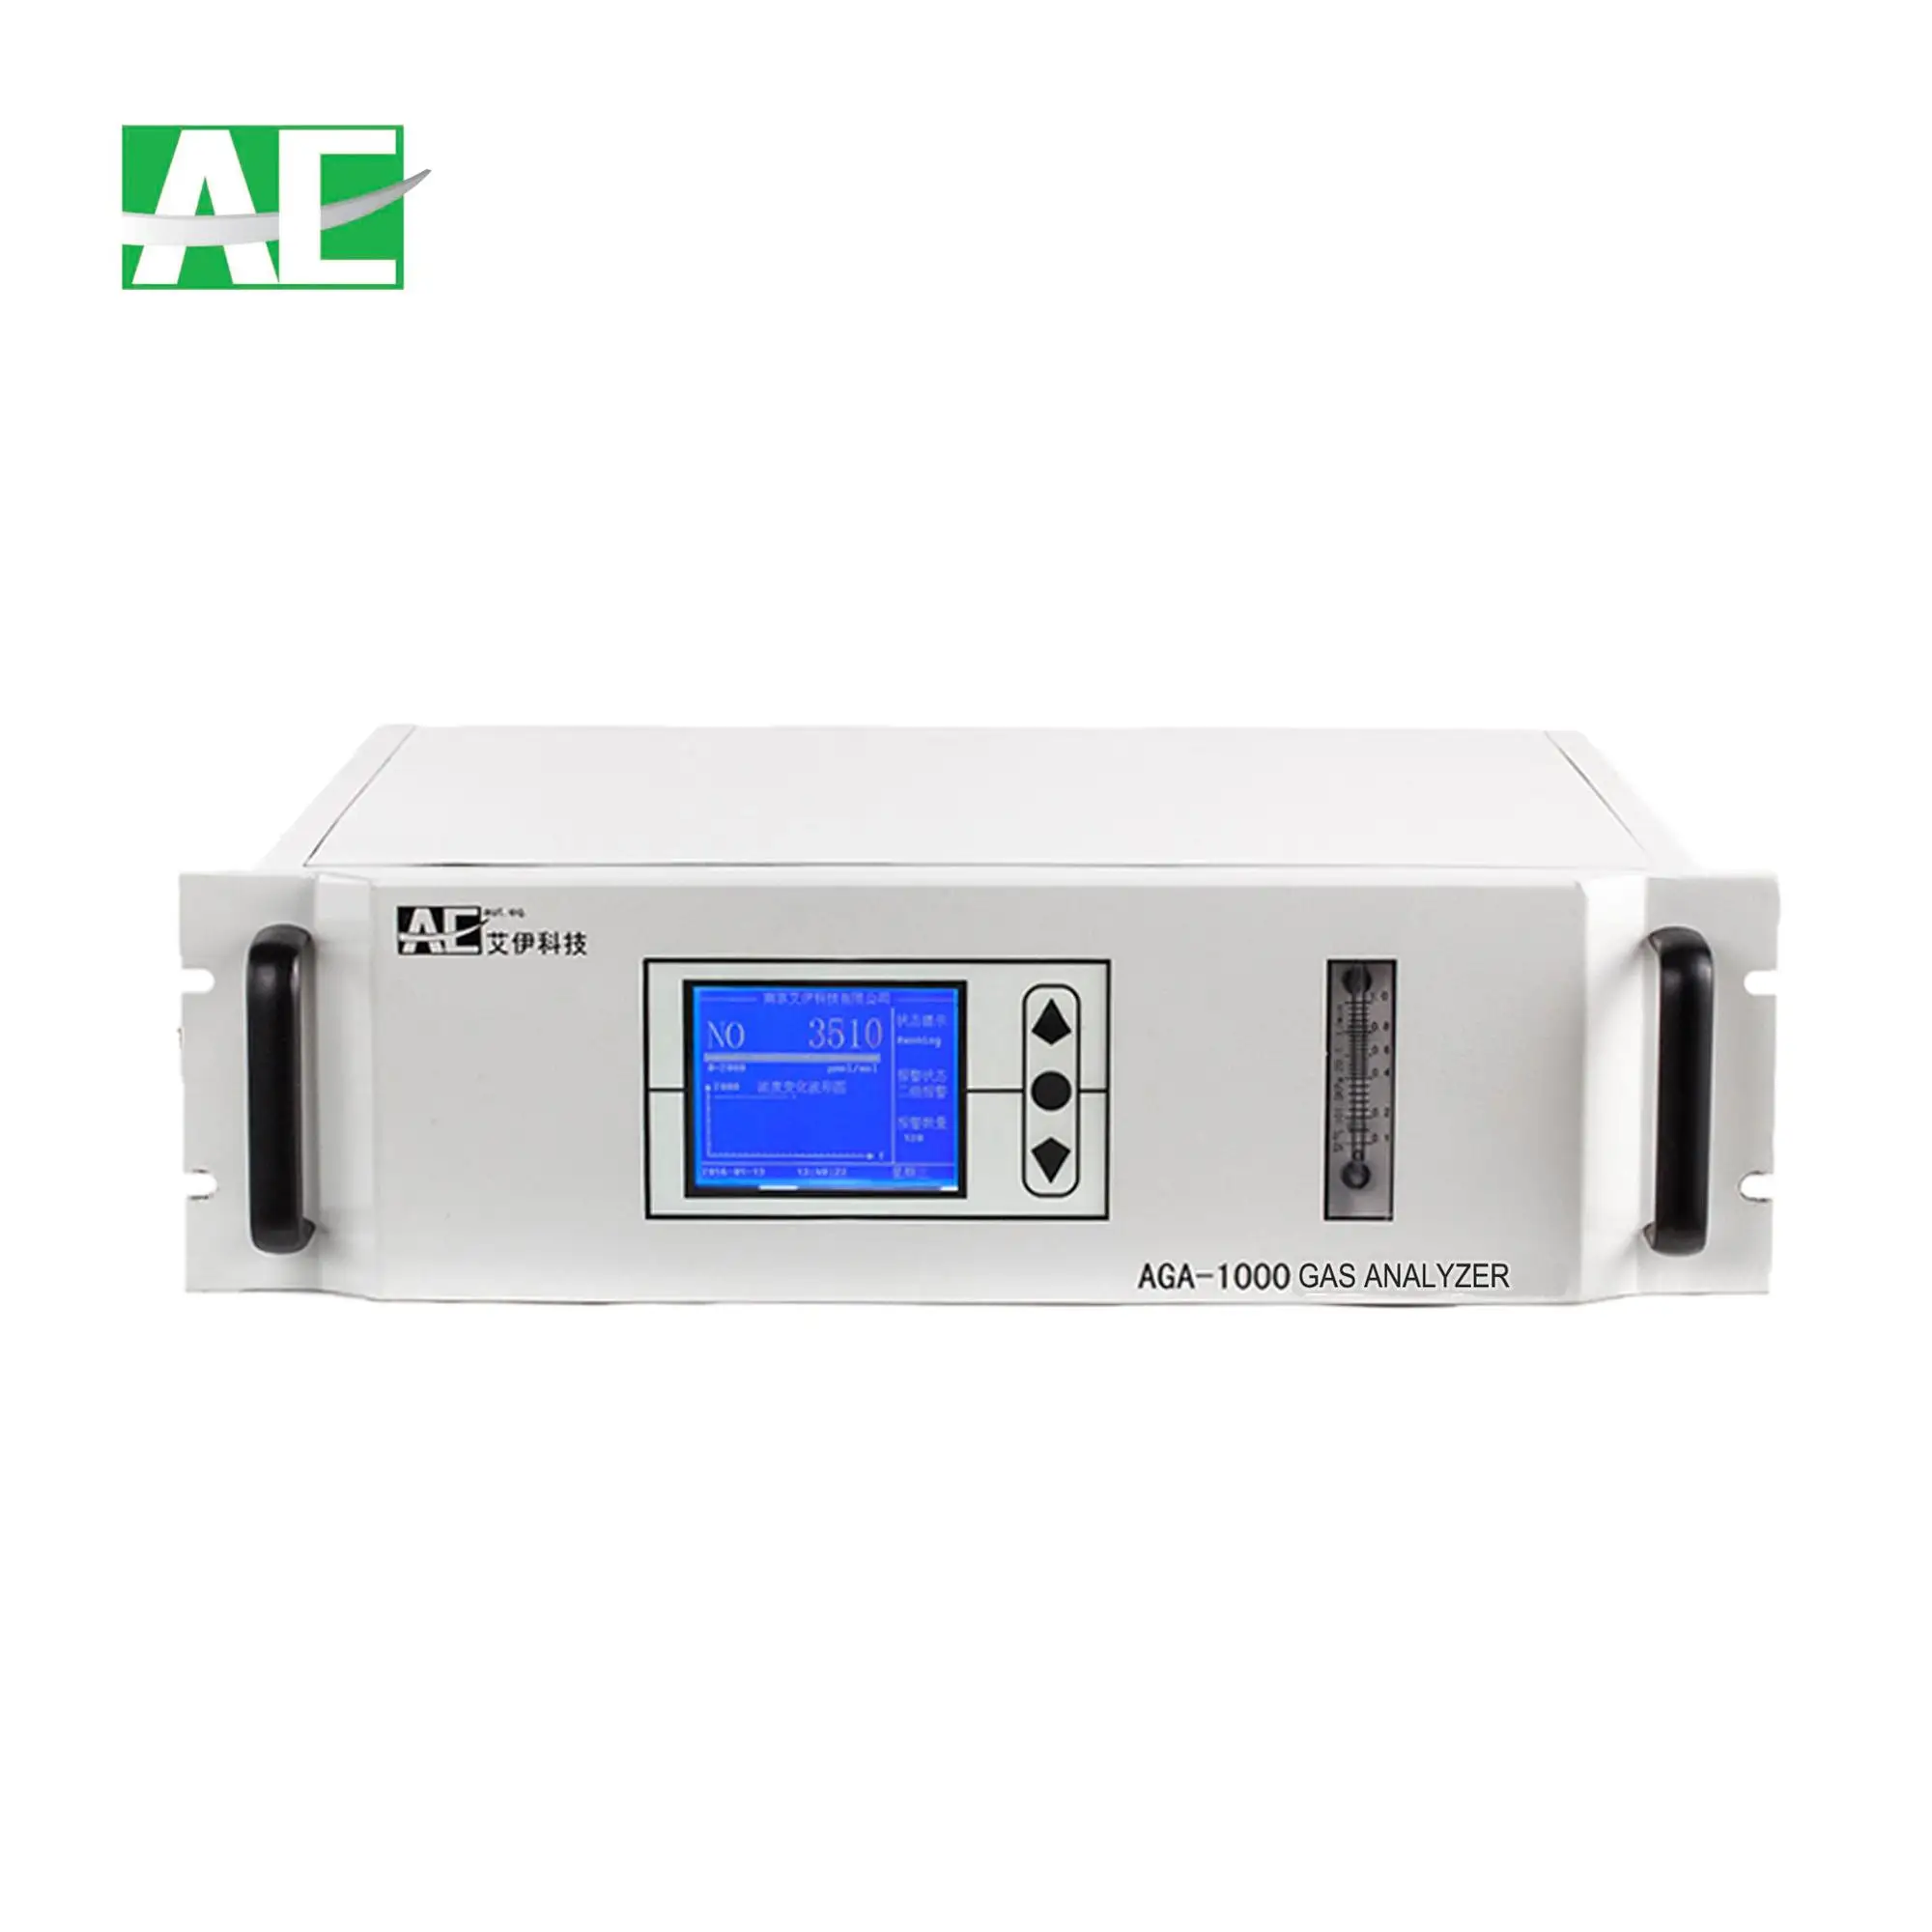 Industry Lab Use Online Infrared Gas Analyzer Co Co2 So2 Nox Buy Infrared Gas Analyzer Co Co2 So2 Nox Gas Analyzer Industry Online Gas Analyzer Product On Alibaba Com